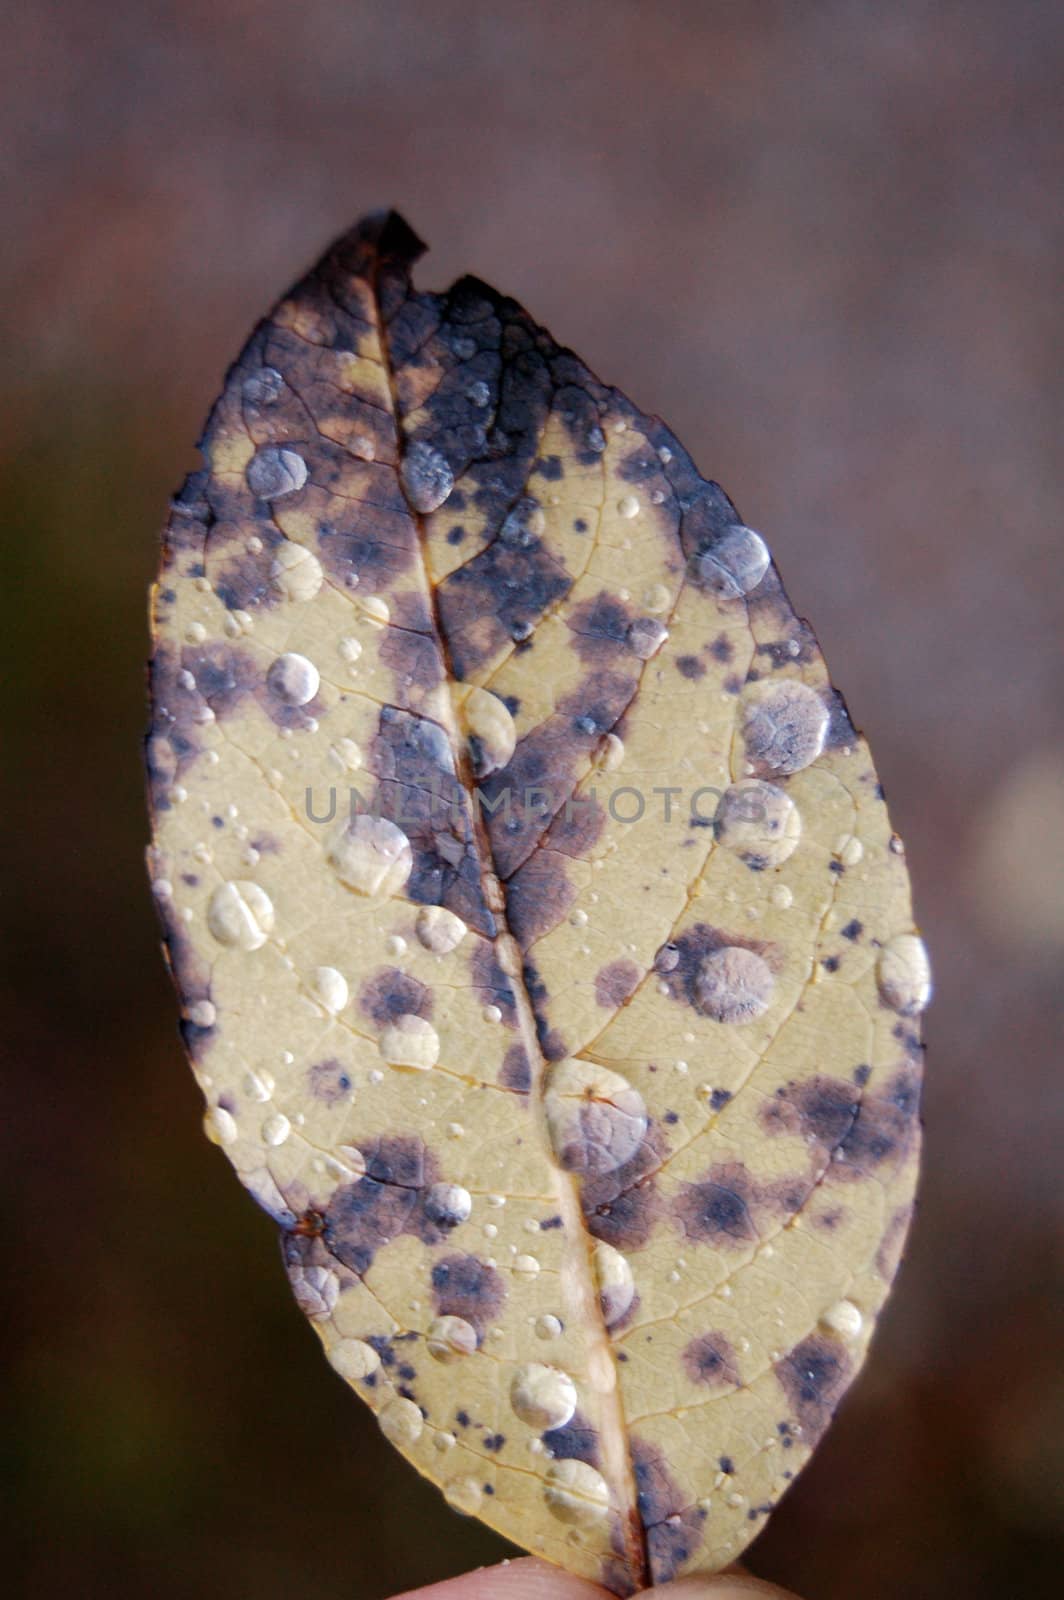 Leaf with raindrops